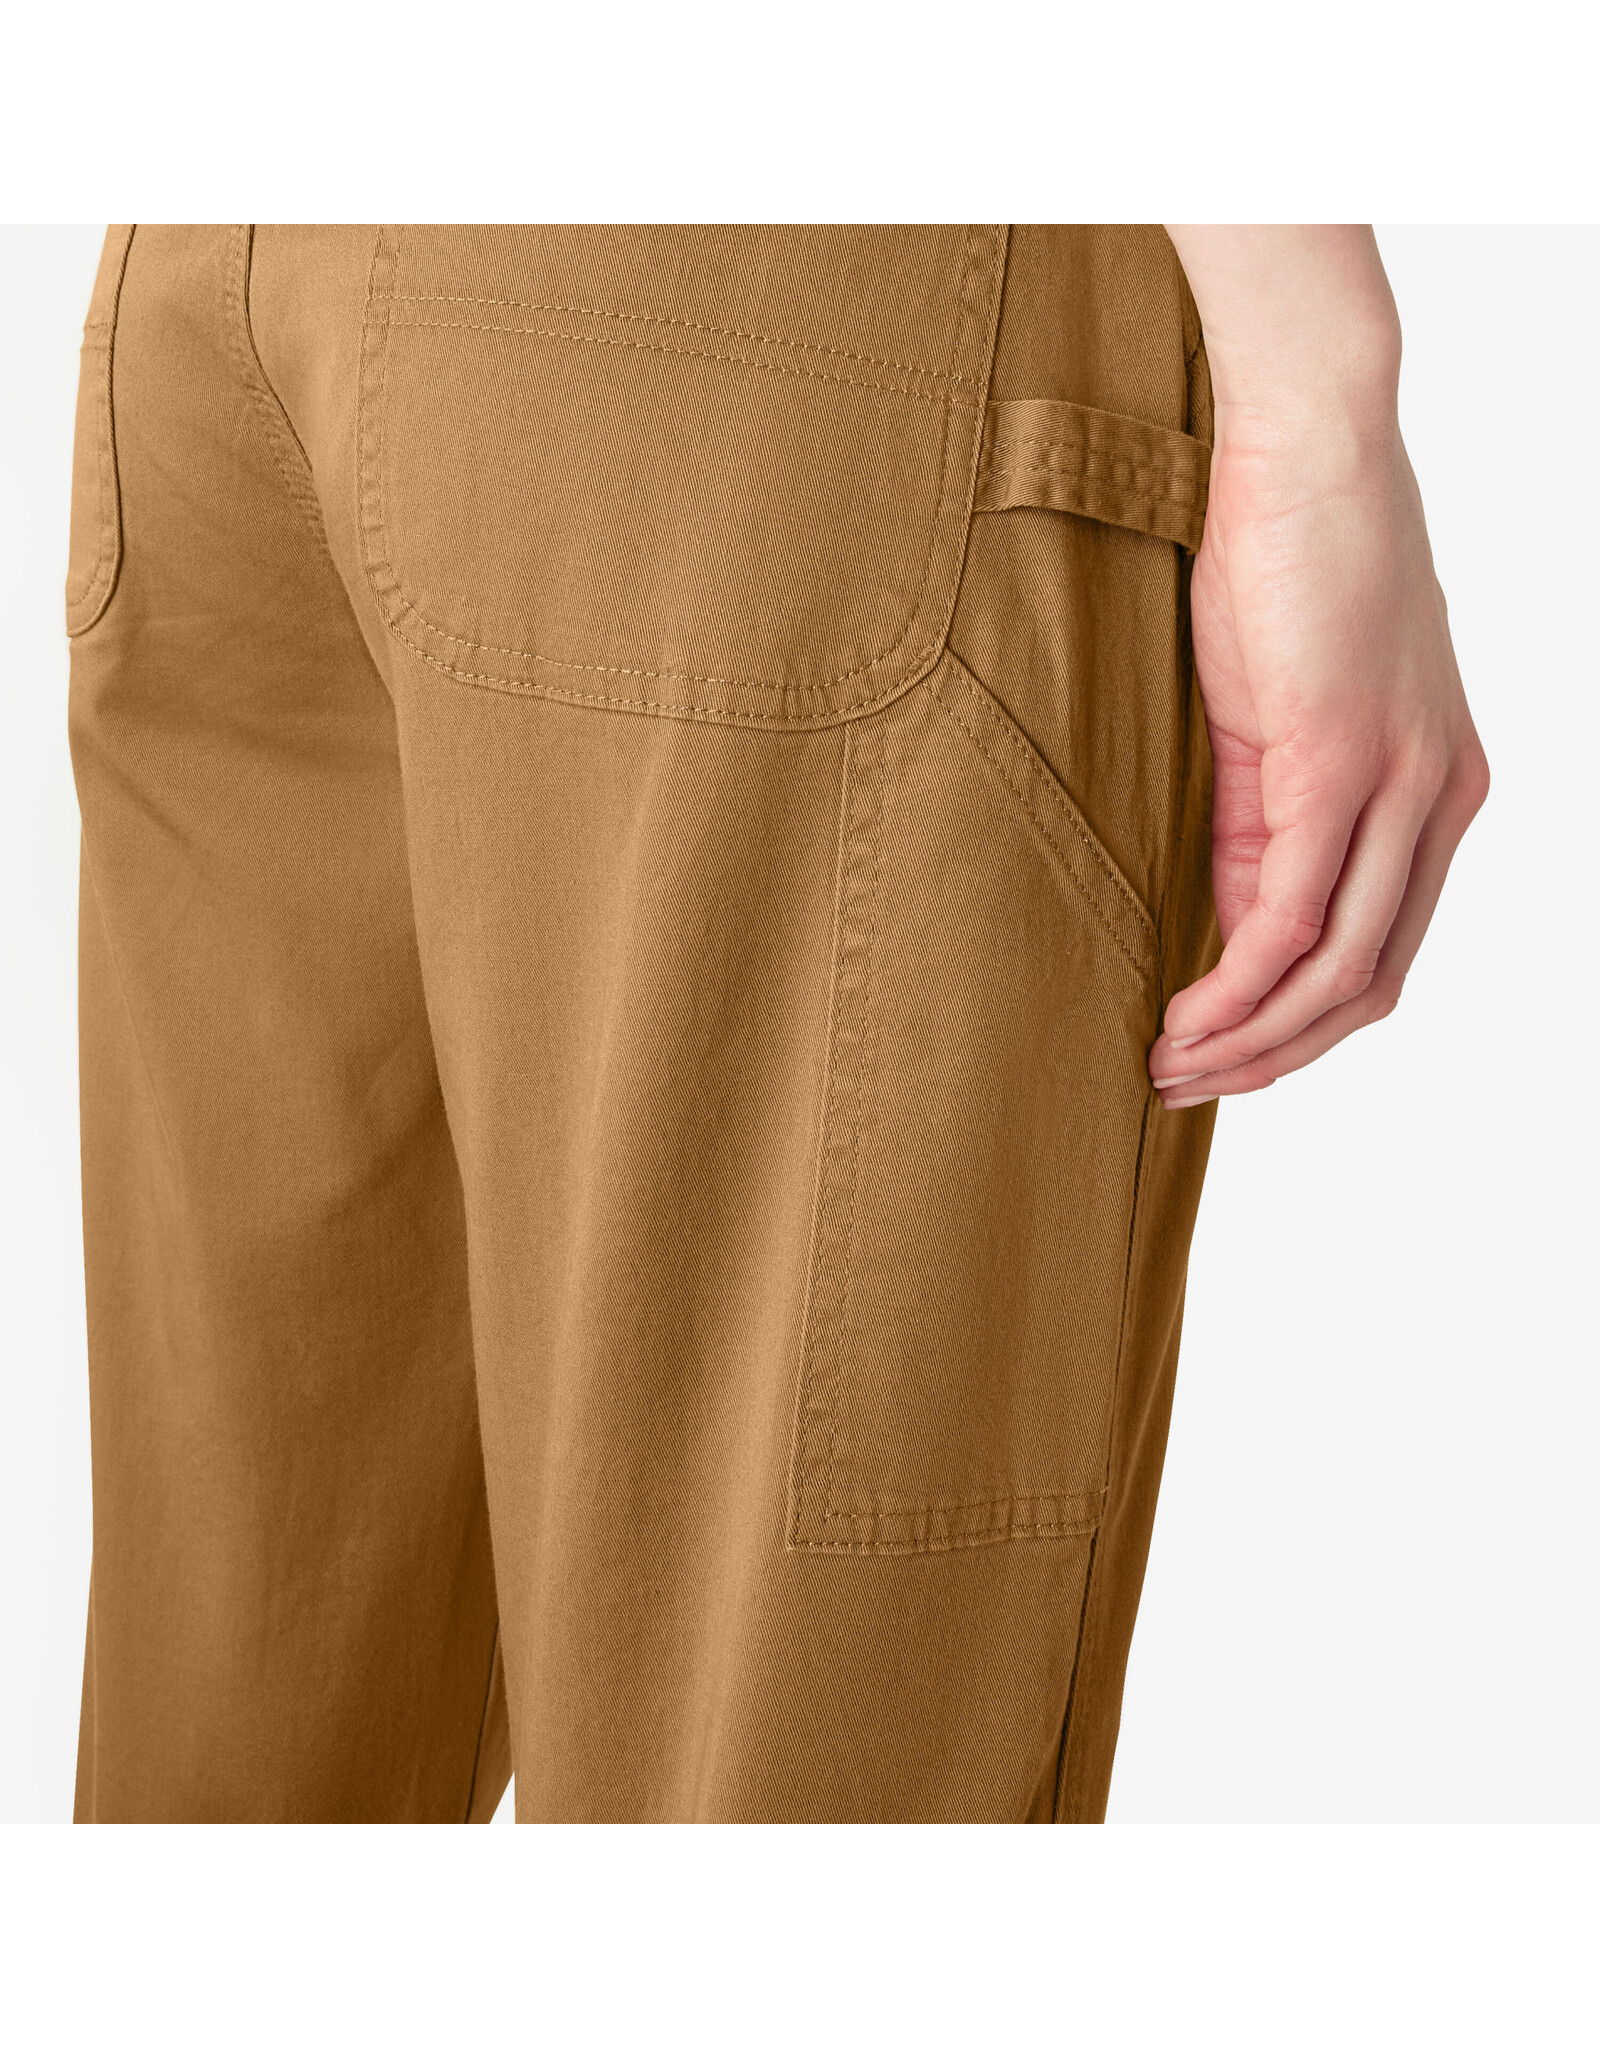 DICKIES Women's Relaxed Fit Carpenter Pants Brown Duck - FPR51BD